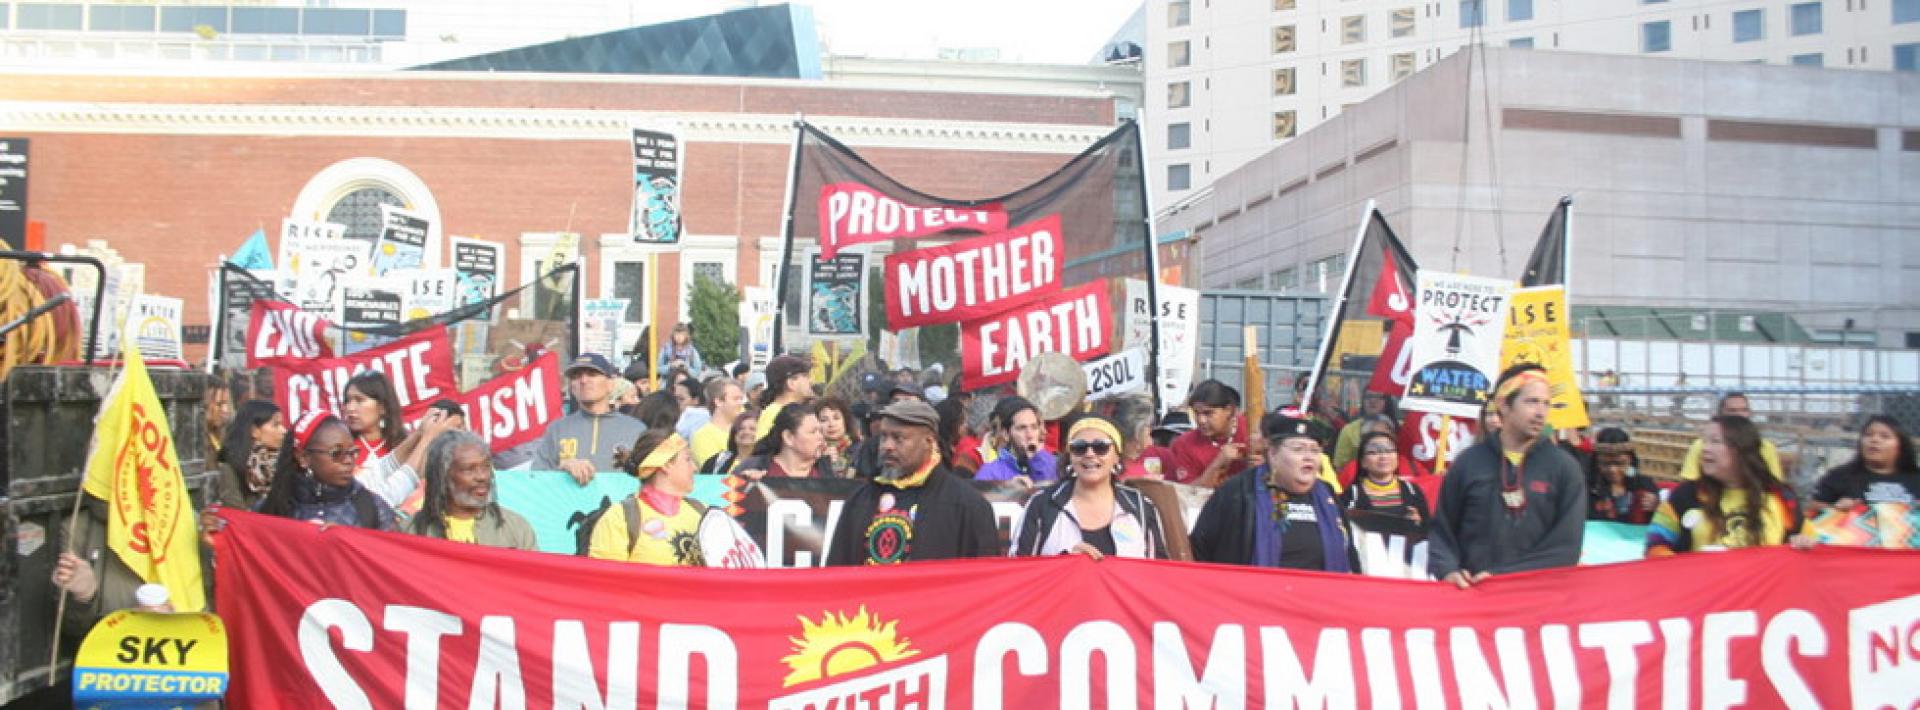 Photo essay: Protesters demand more action against climate change